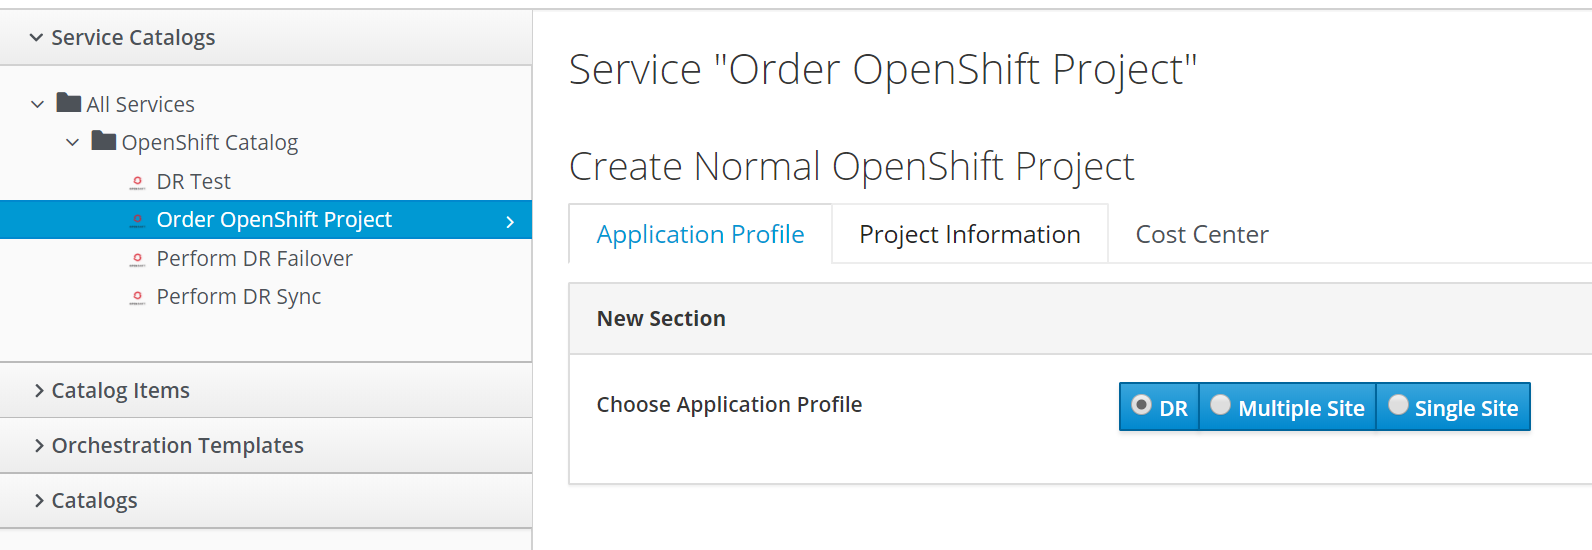 openshift_project_order1